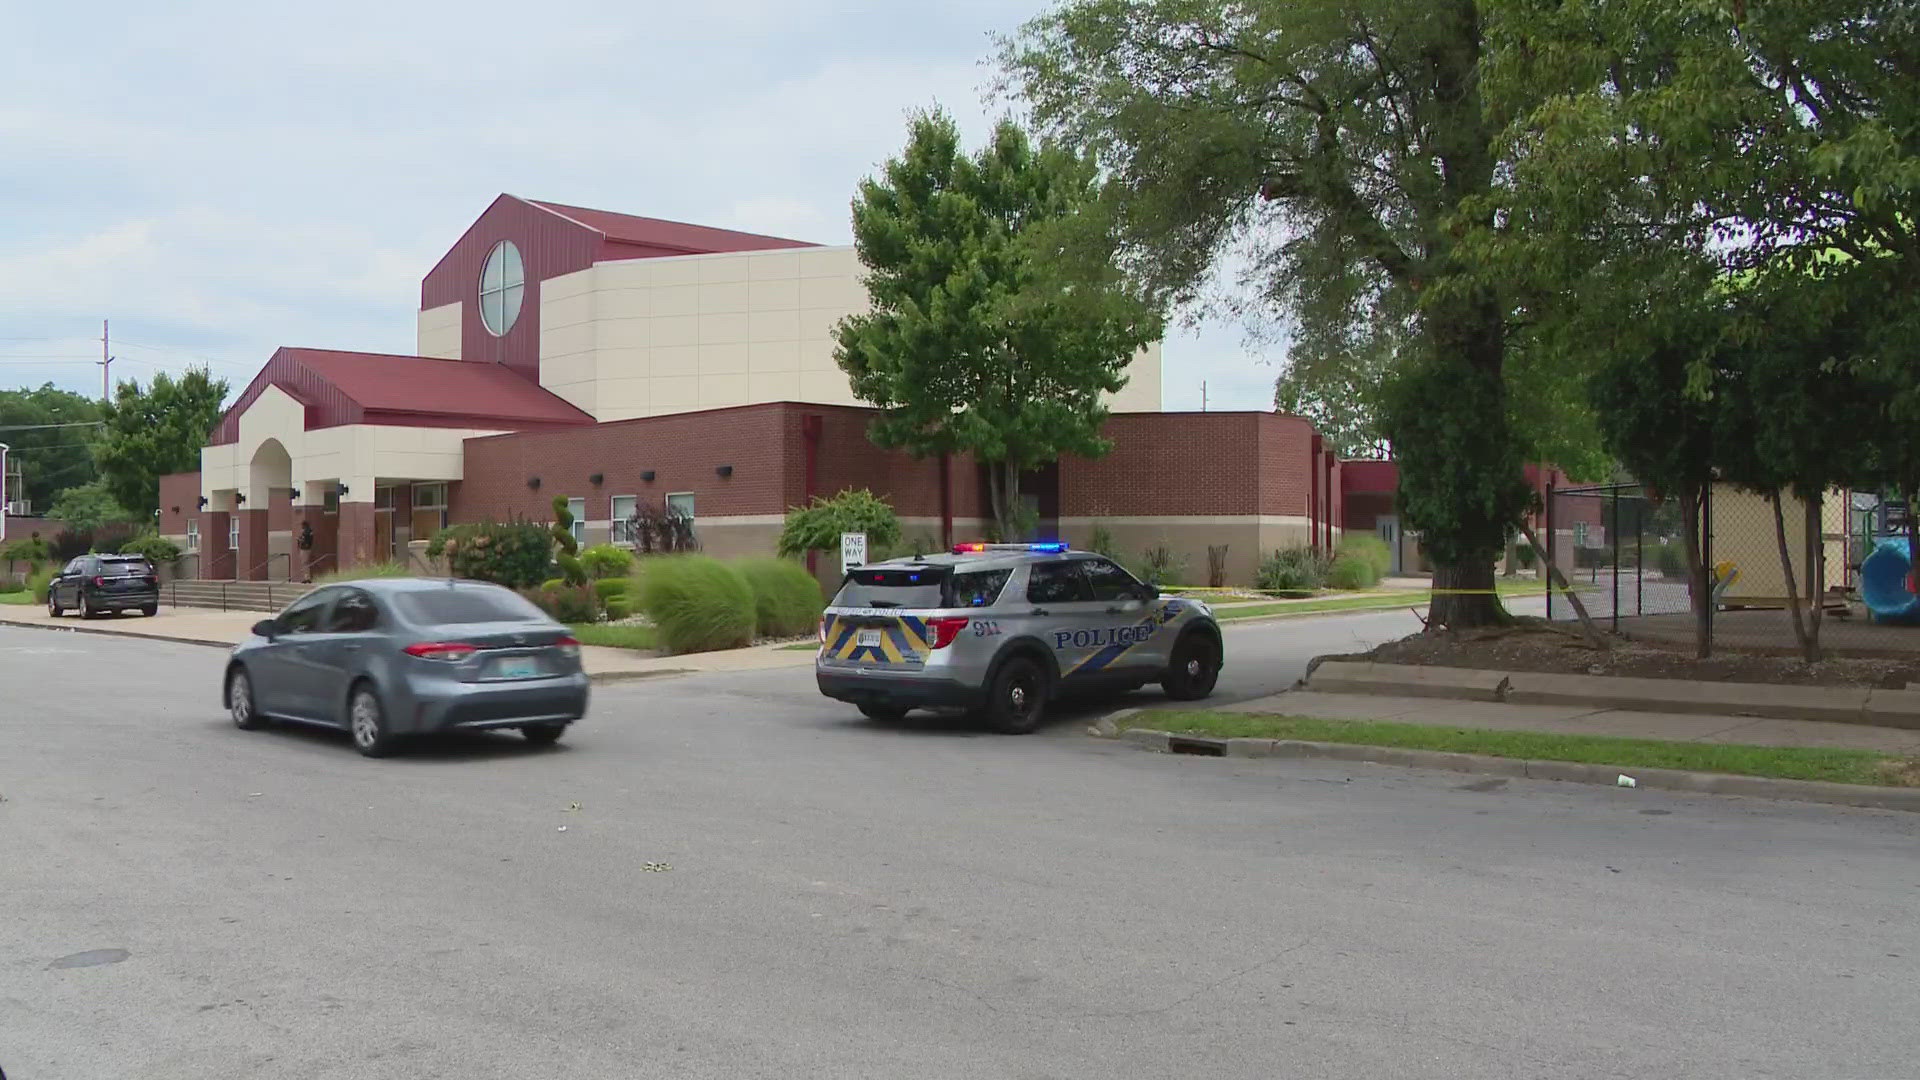 The shooting happened outside Bates Memorial Baptist Church on Wednesday.